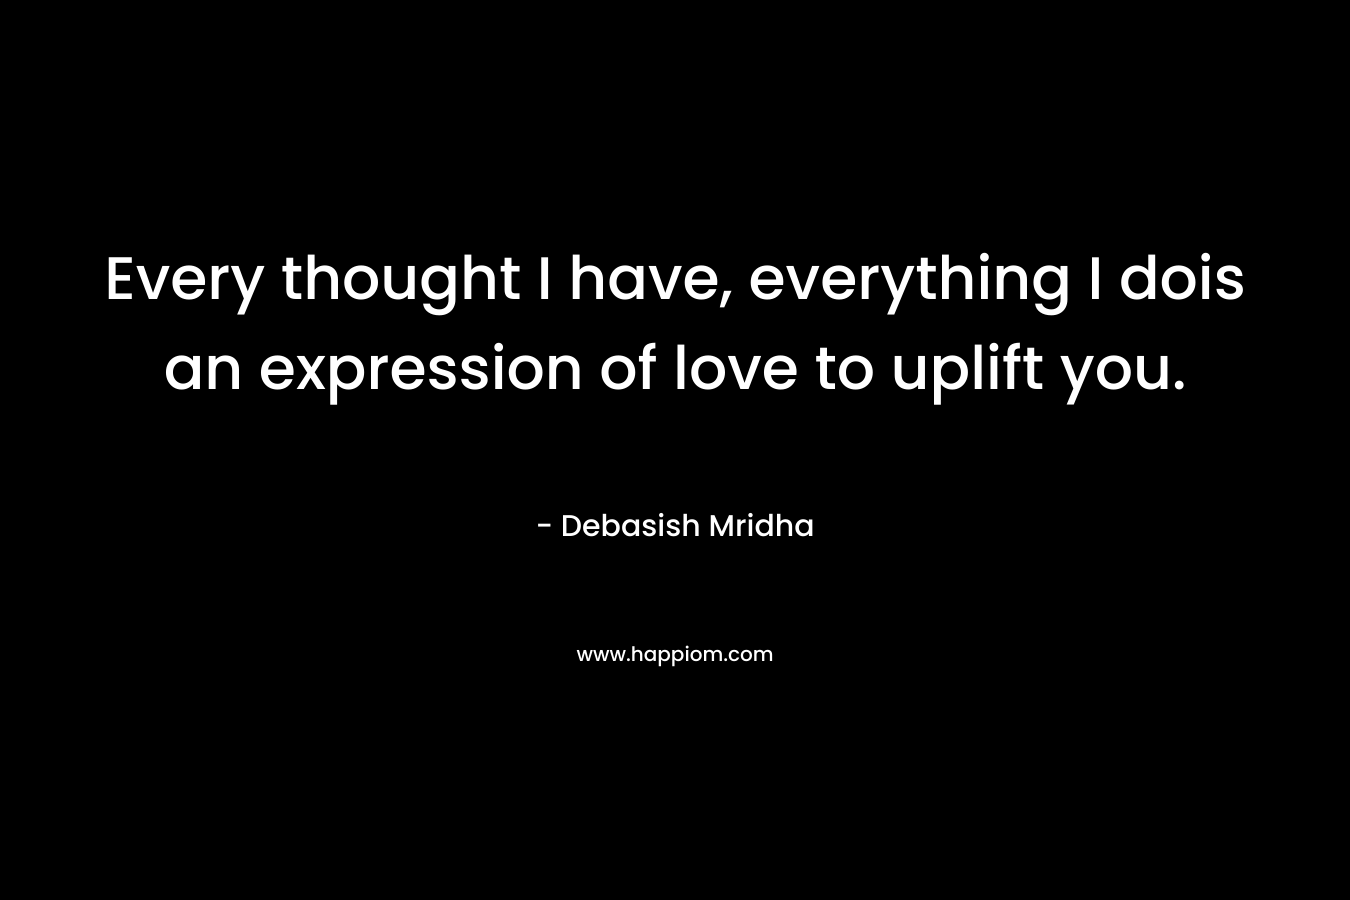 Every thought I have, everything I dois an expression of love to uplift you. – Debasish Mridha